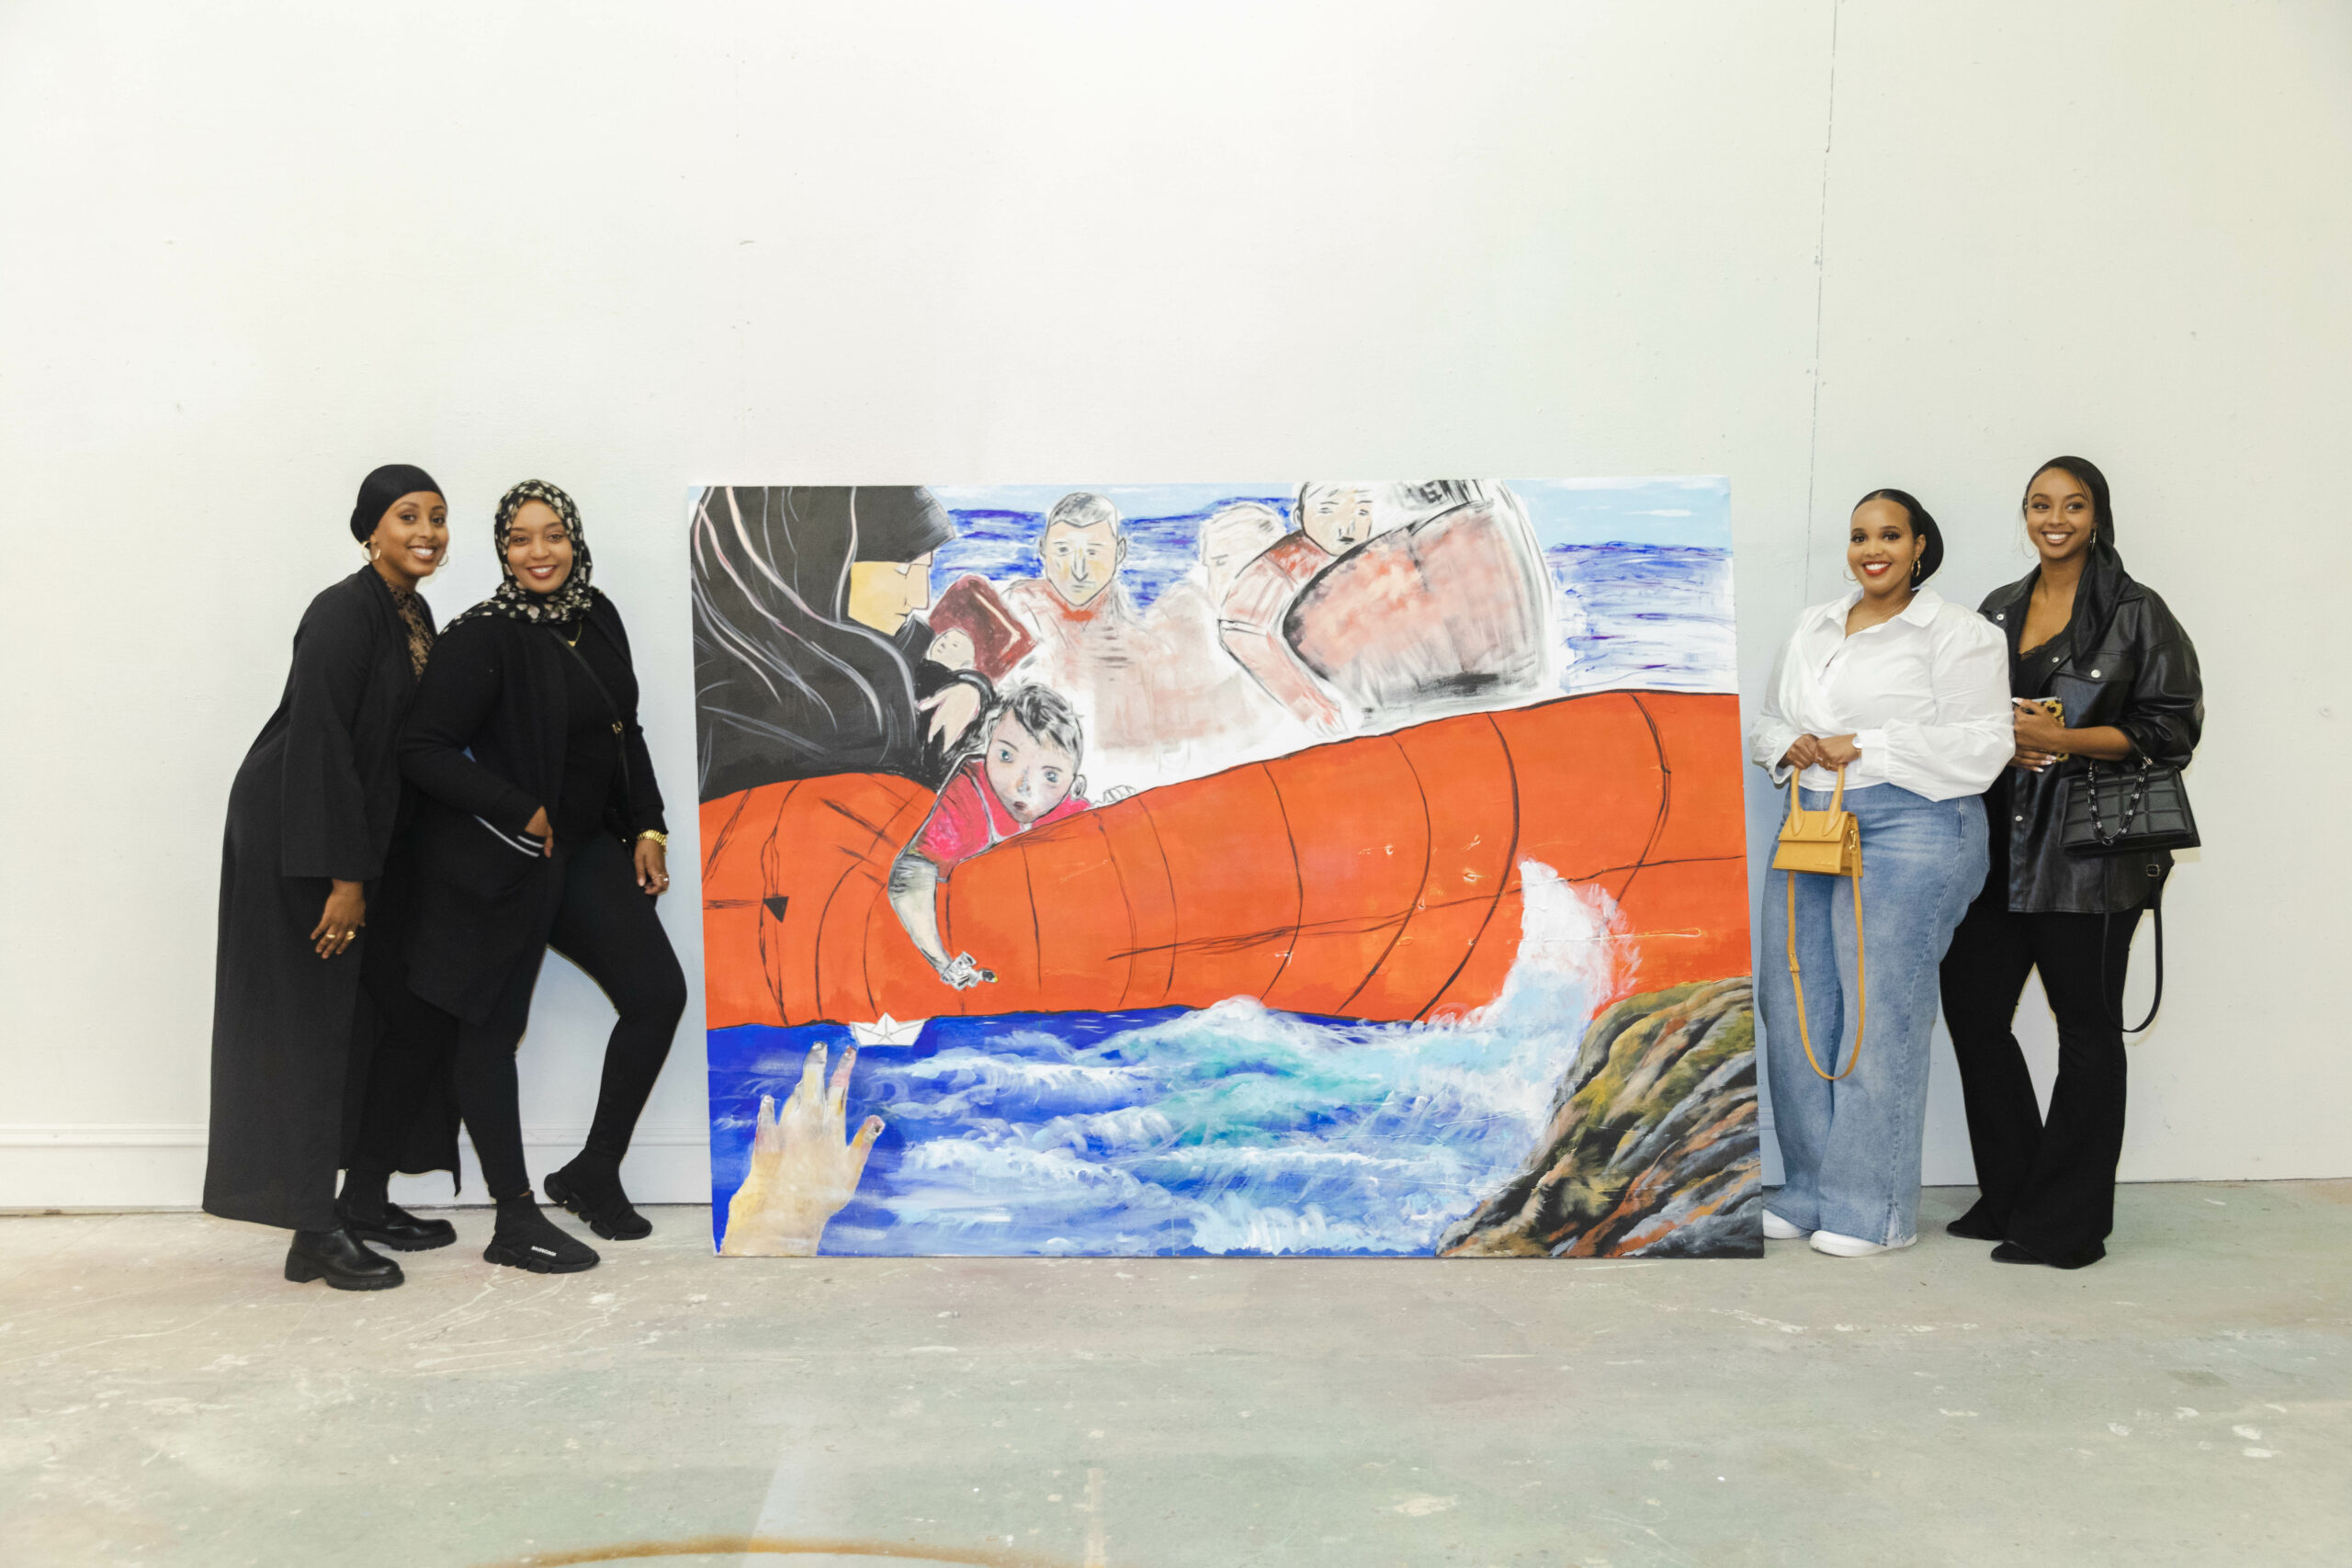 Four people stand on either side of large painting with orange life raft in blue water.